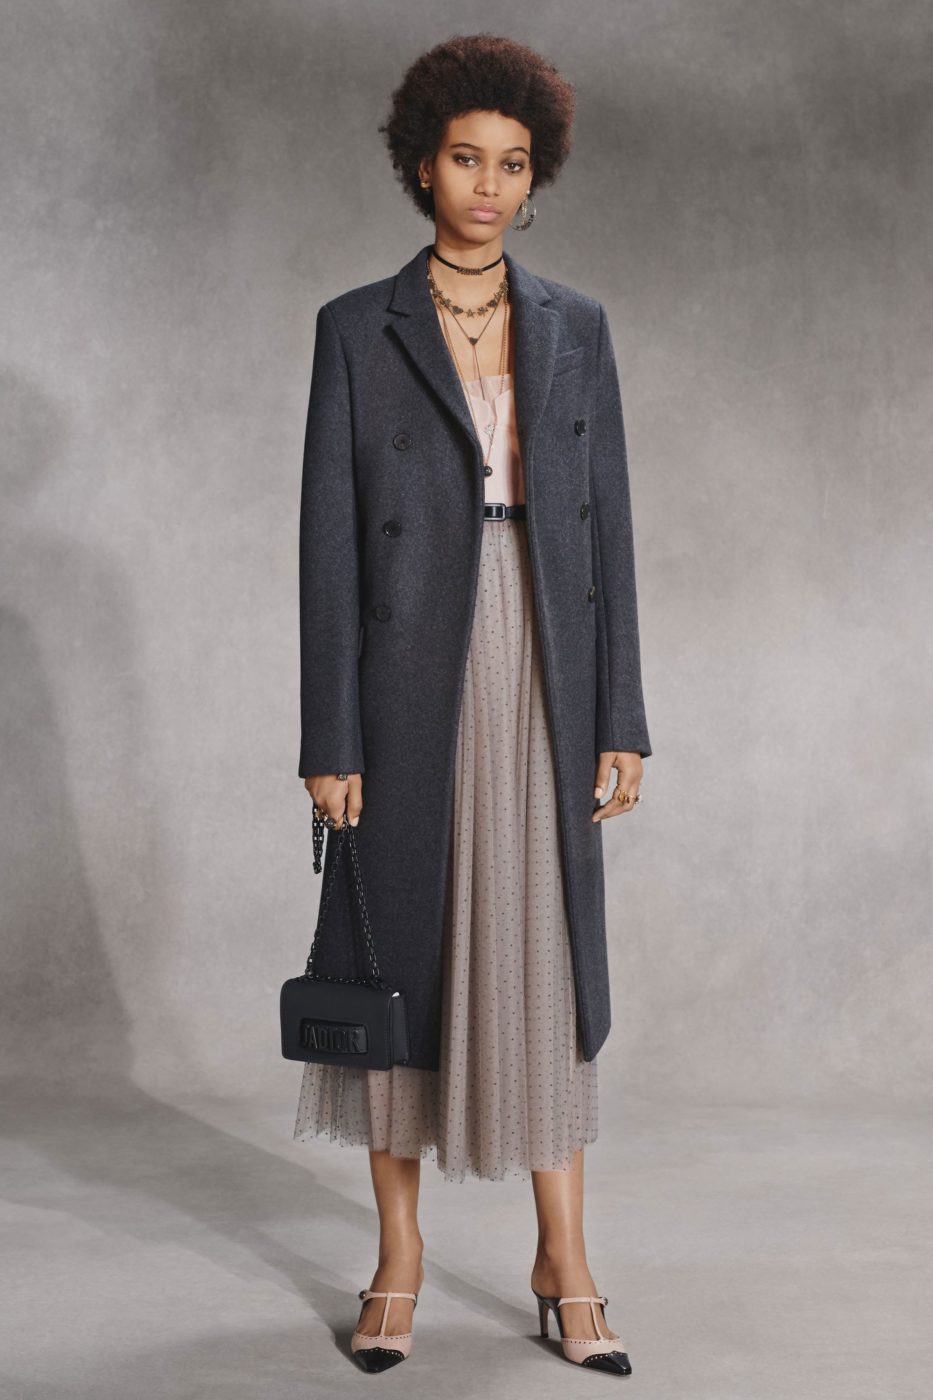 Christian Dior Pre-Fall 2018 Collection | LES FAÇONS